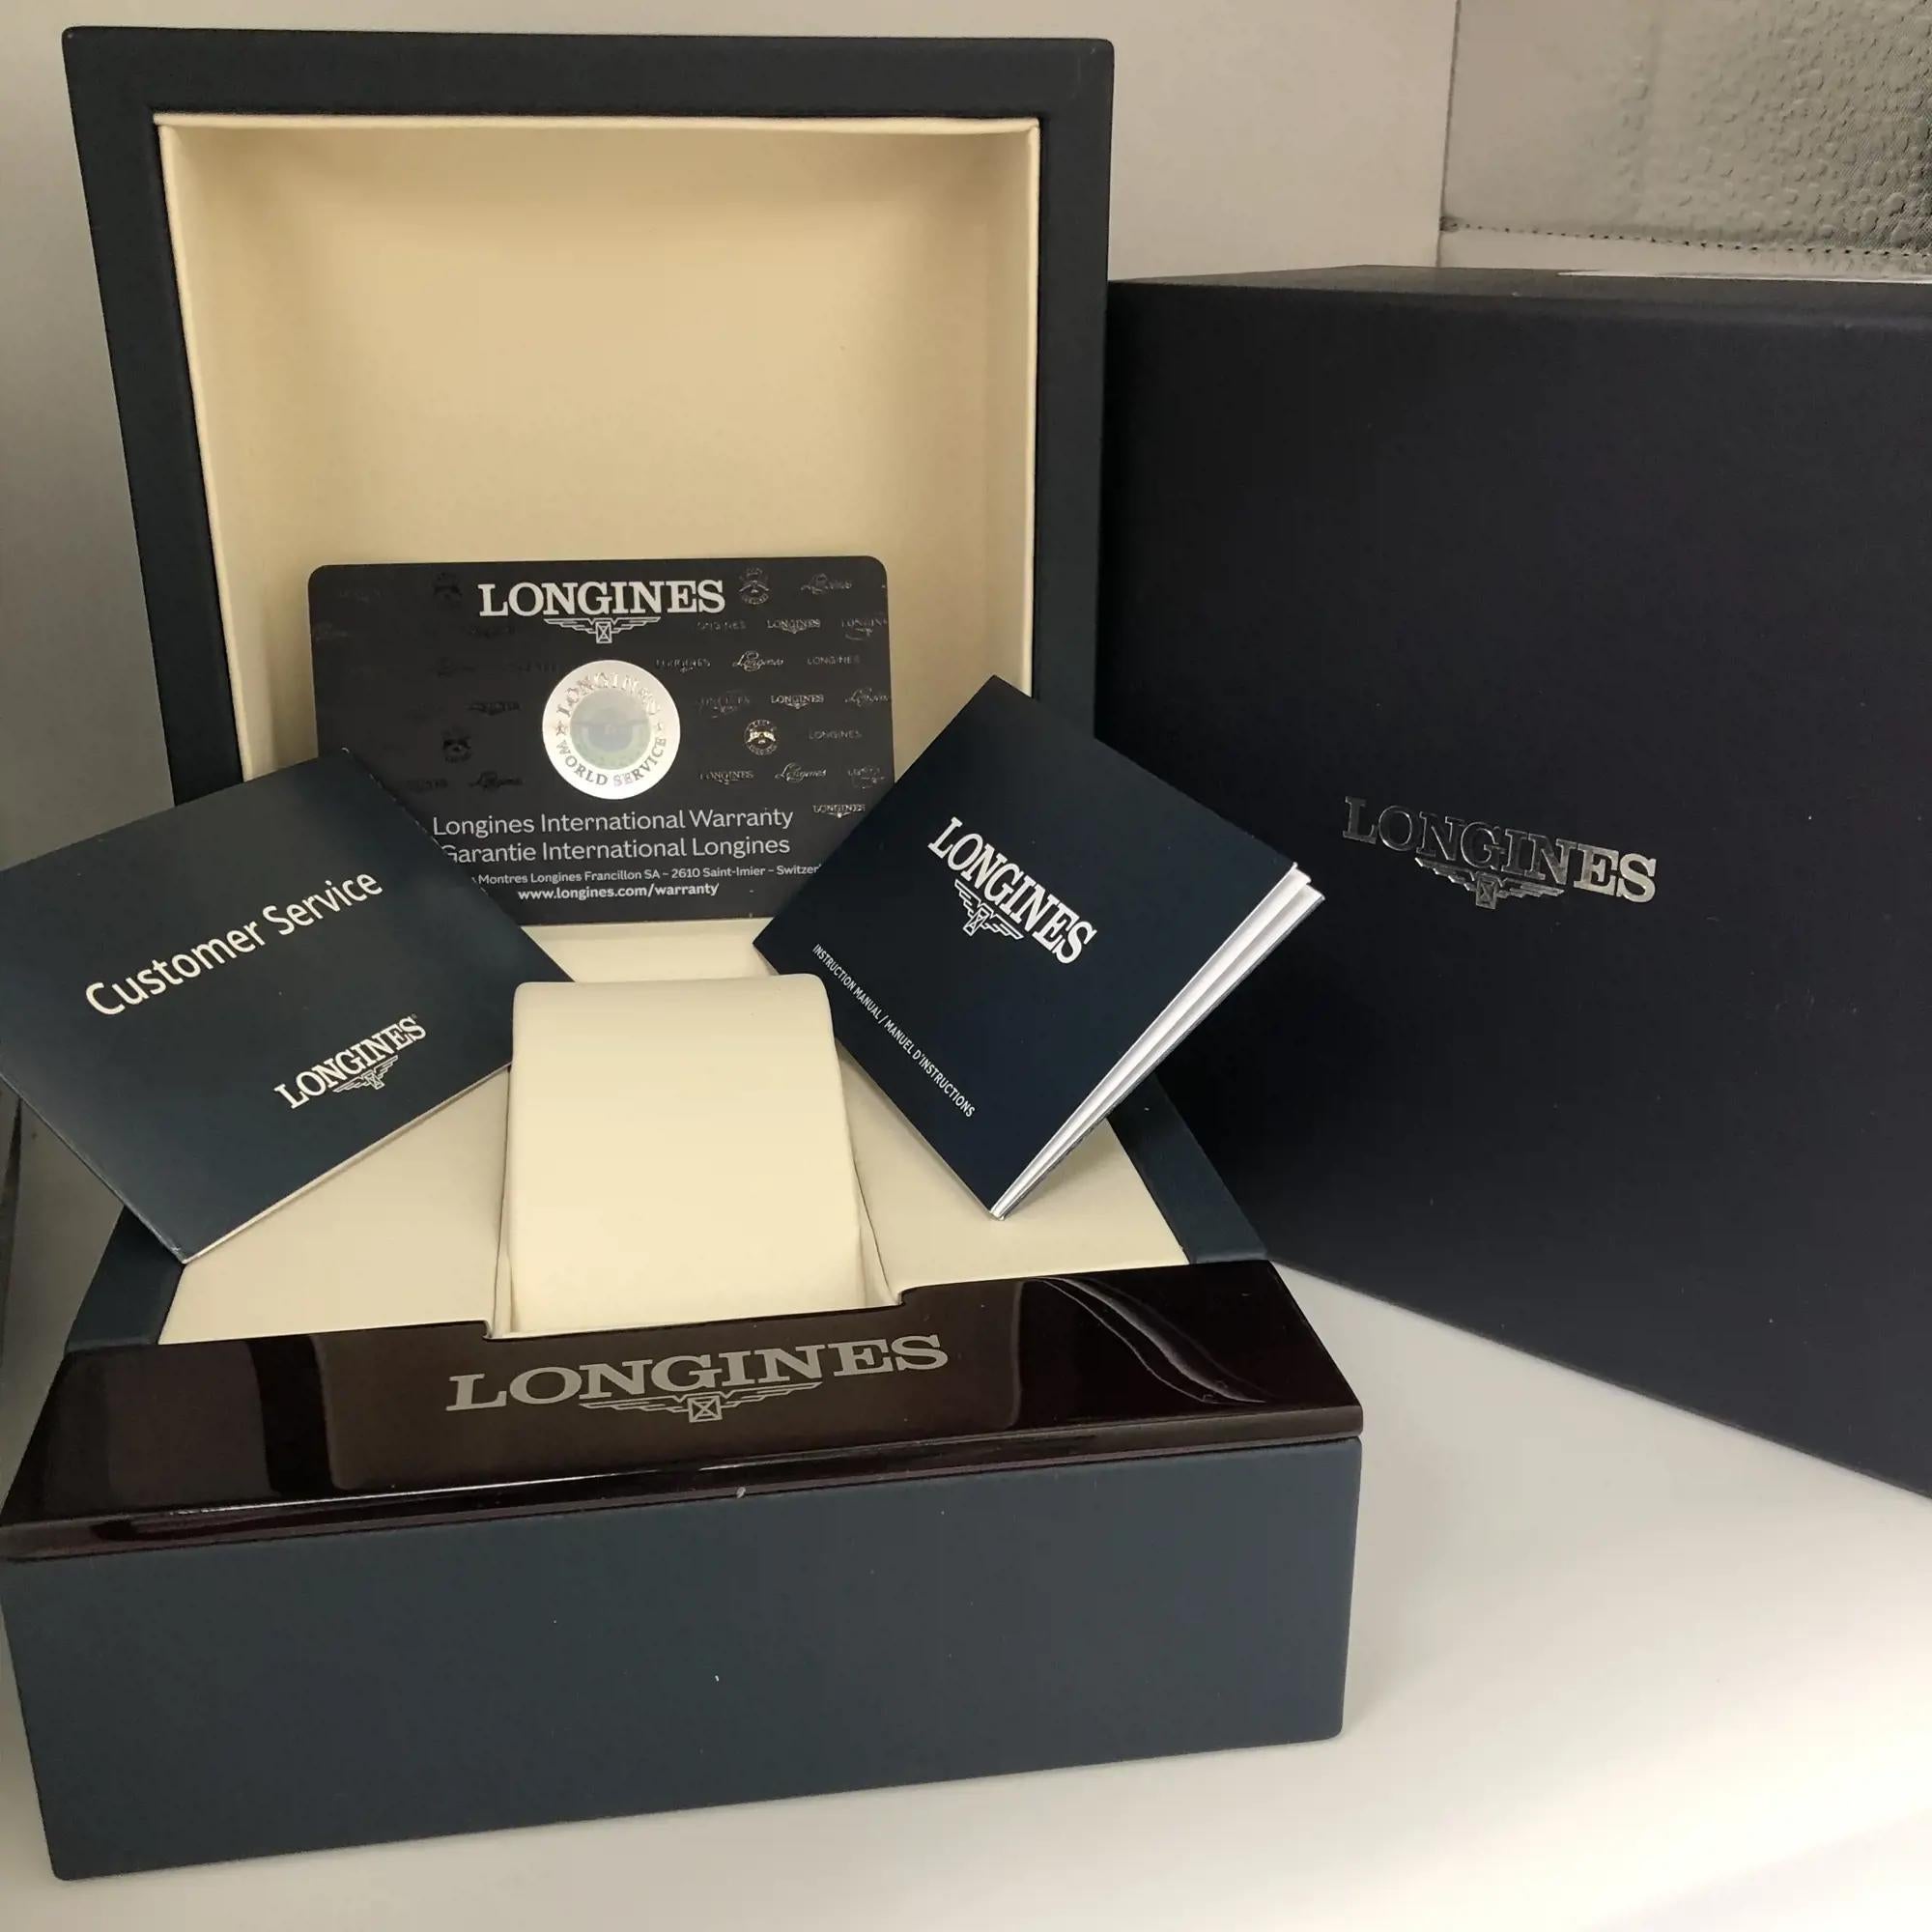 Brand New. Comes with the original box and papers.

* Free Domestic Shipping
* five-year manufacture warranty from Longines 
* 14-day money-back guarantee return. The buyer can authenticate the watch at any boutique or dealership within 14